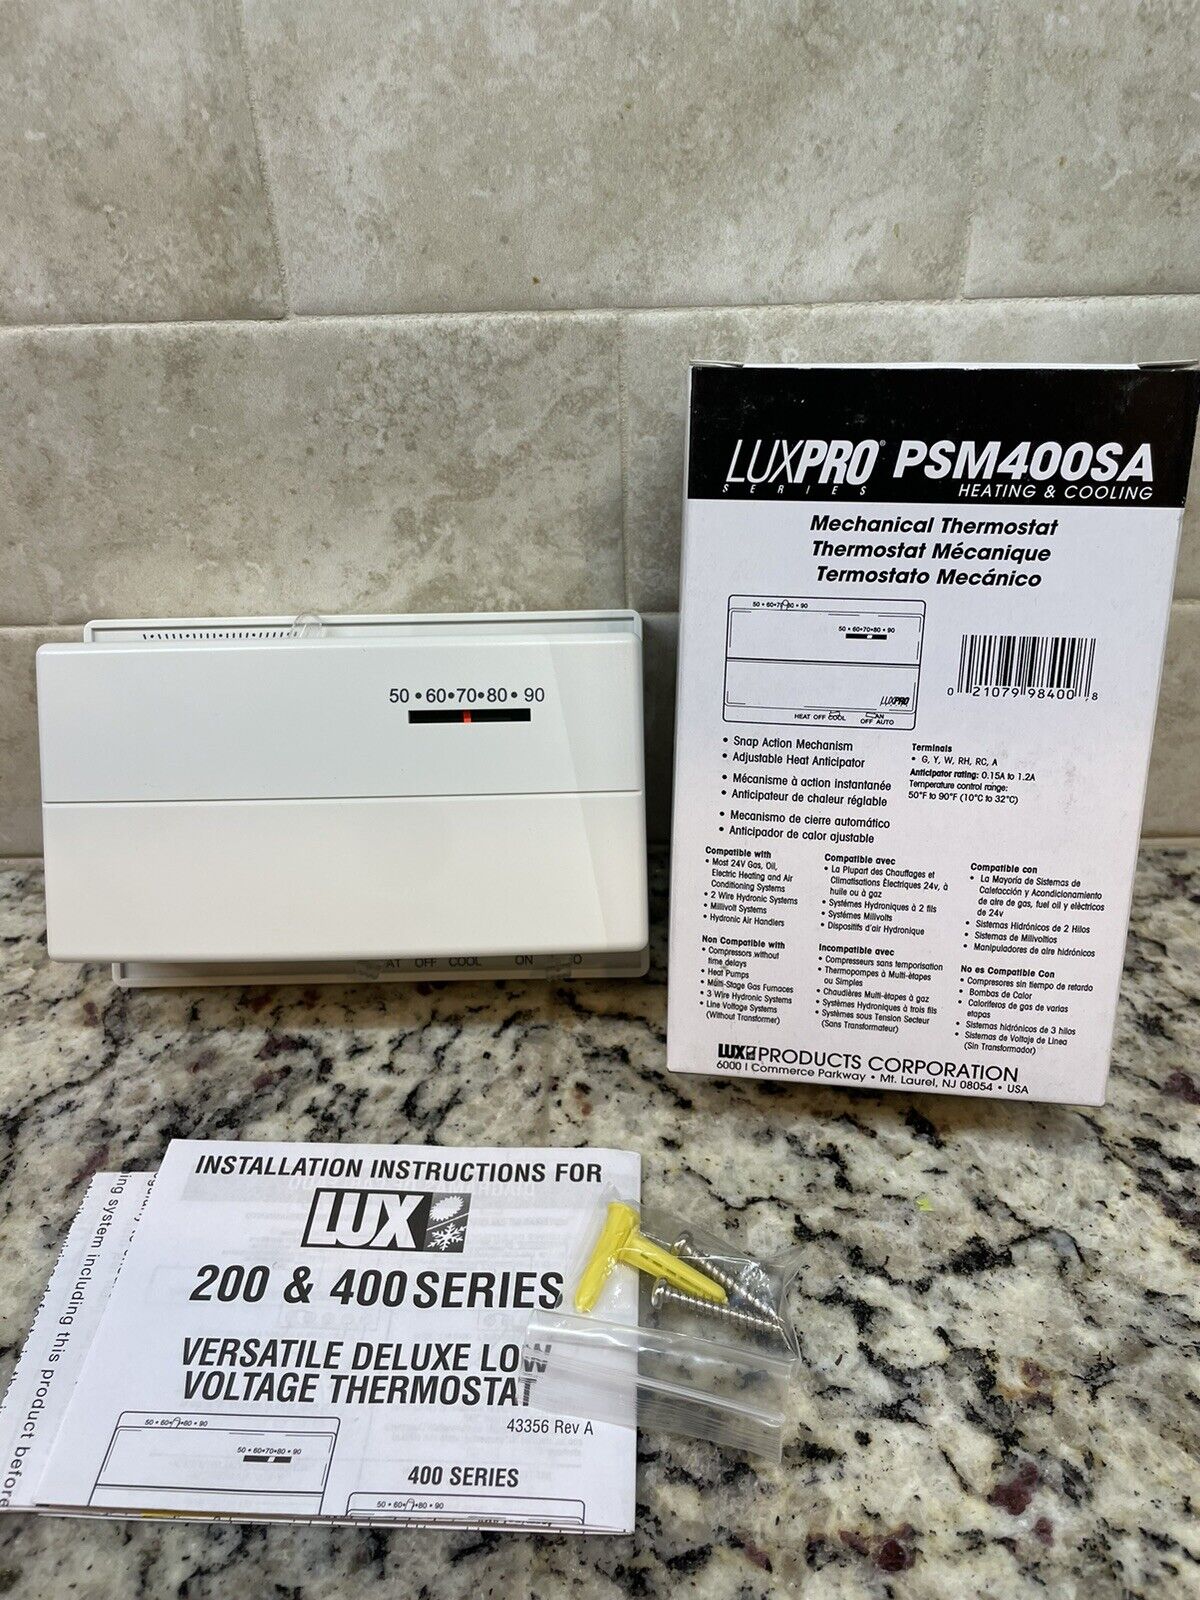 LUXPRO Mechanical Thermostat LUX Series PSM400SA 1 Stage Heat/Cool Snap Action